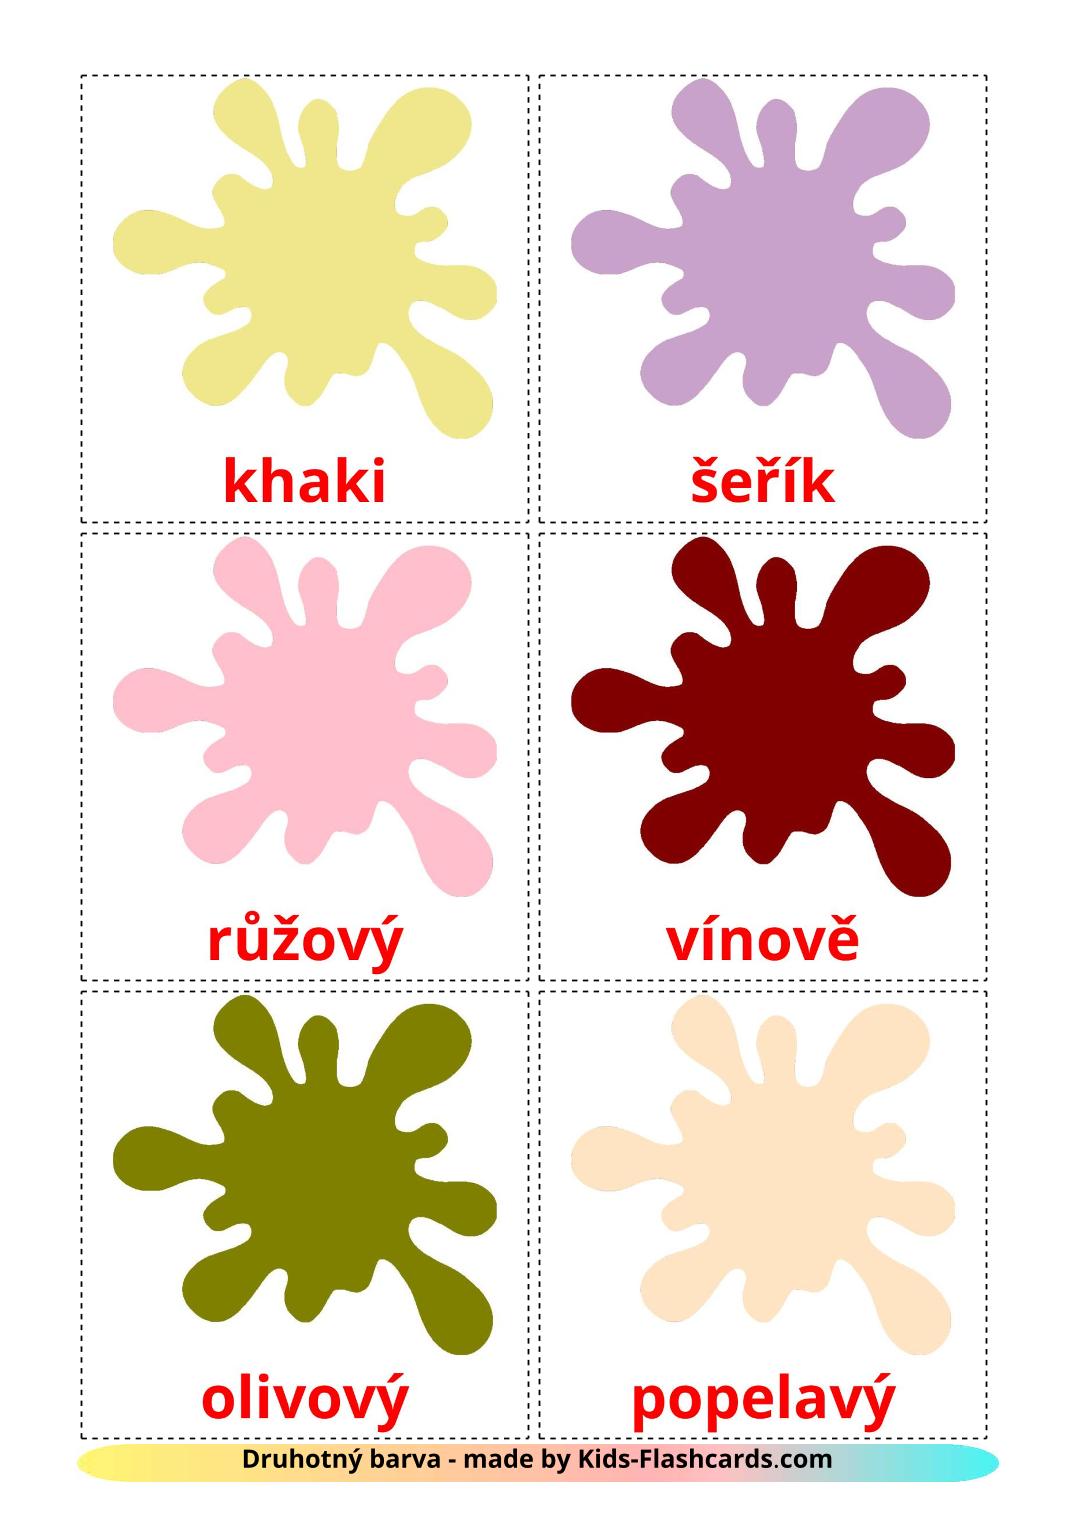 Secondary colors - 20 Free Printable czech Flashcards 